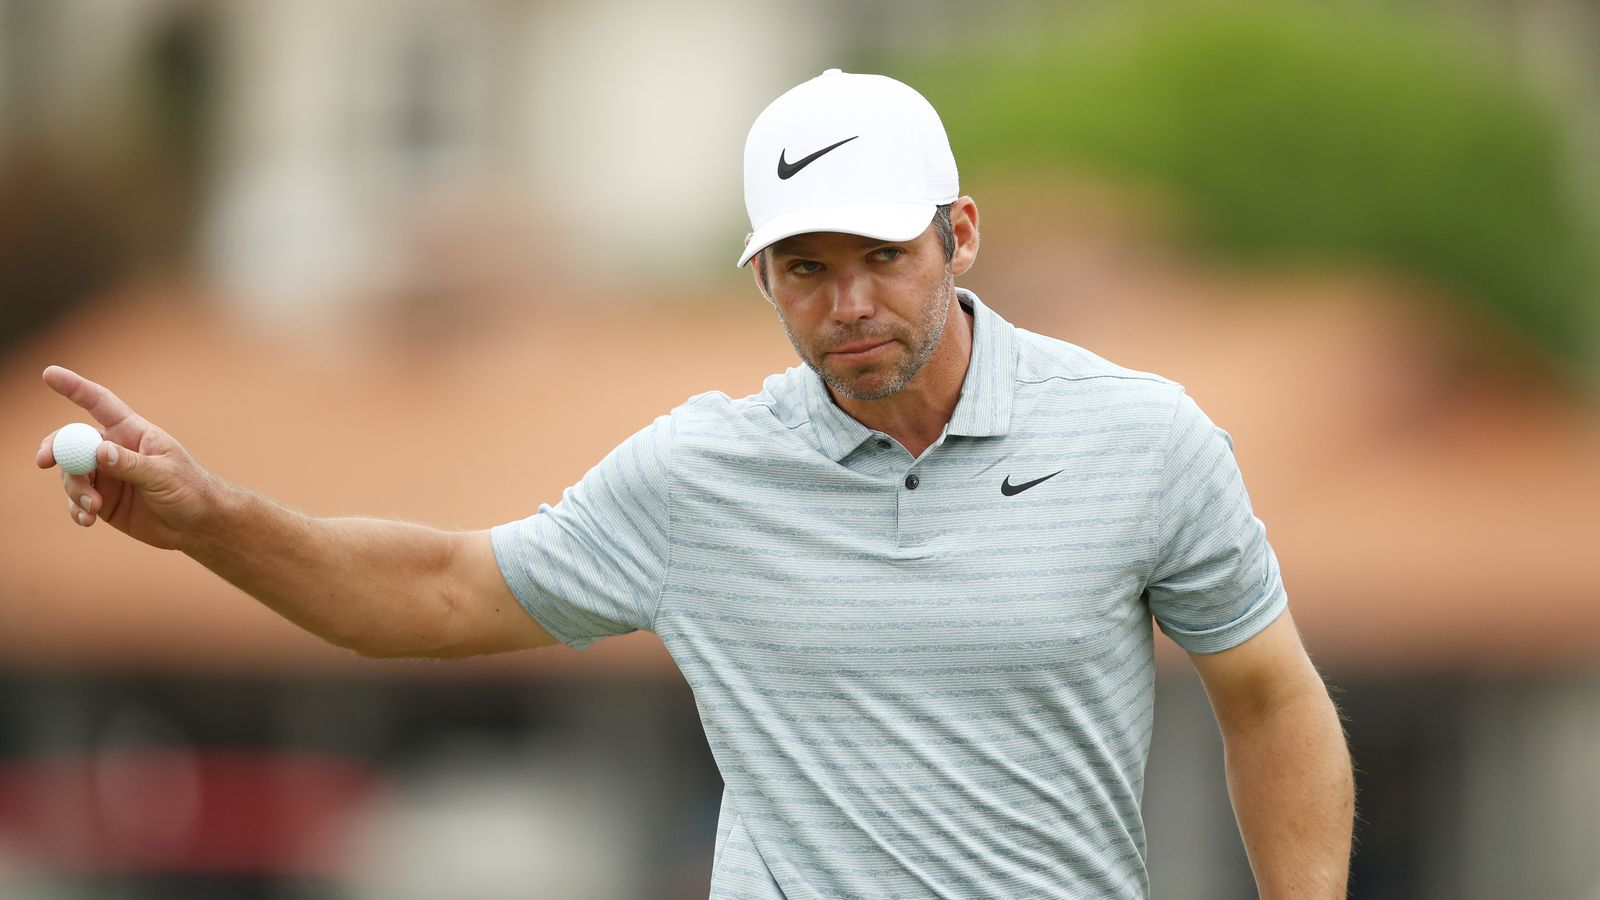 WGC Match Play: Schedule, fixtures for knockout rounds in Texas | Golf ...